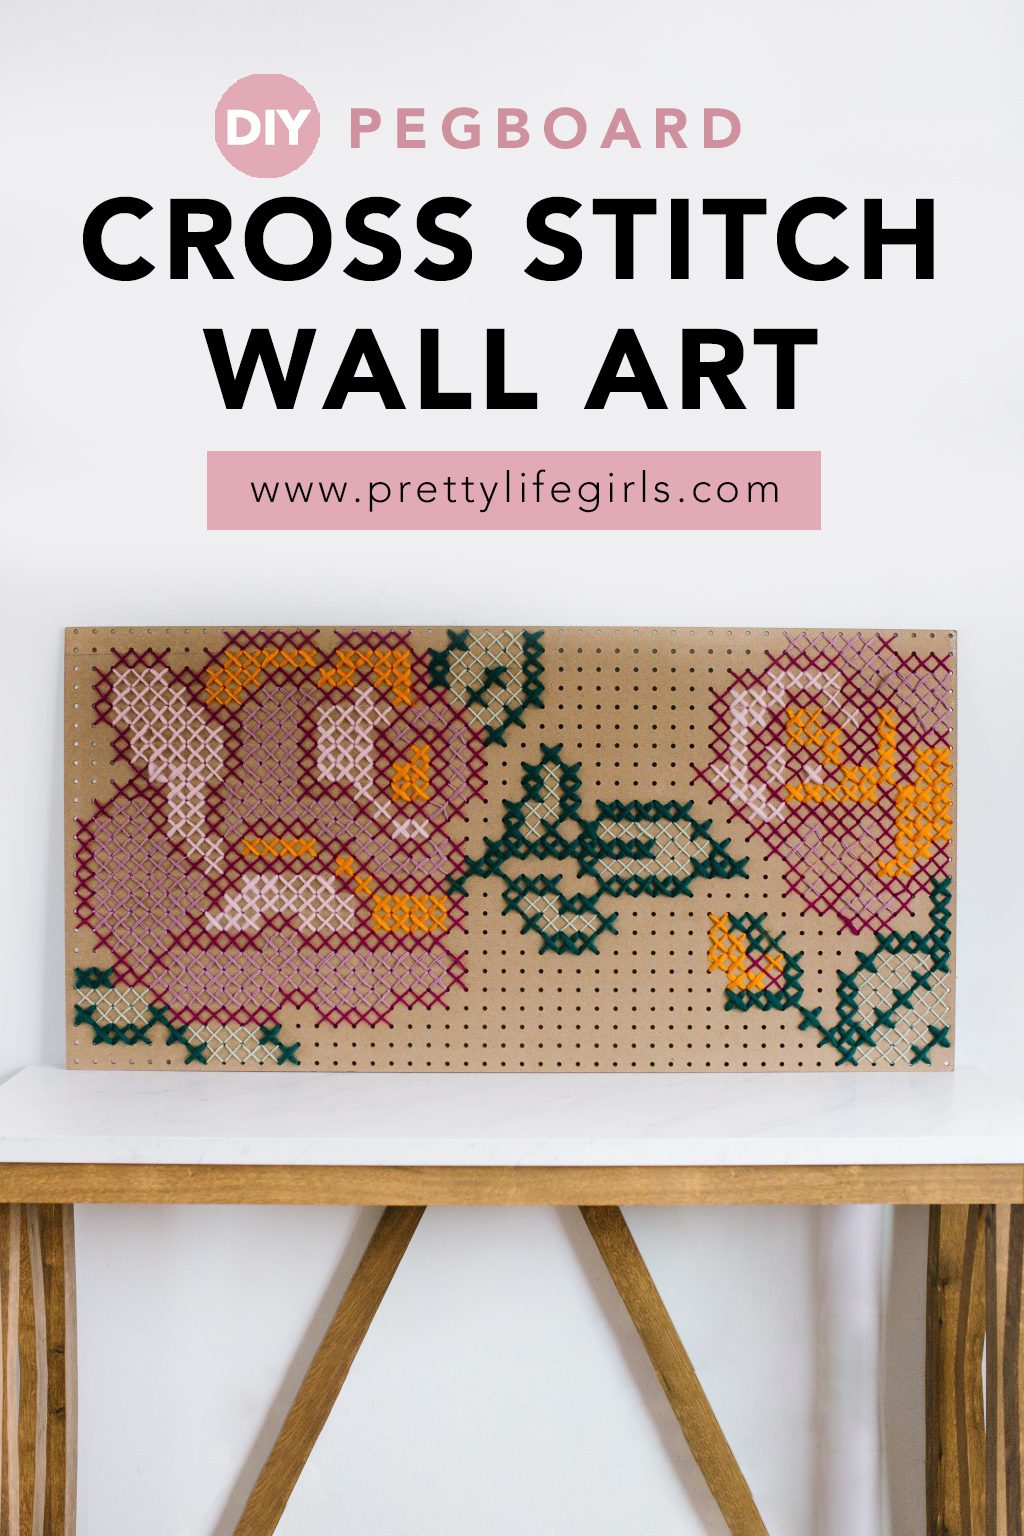 DIY Pegboard Cross Stitch Wall Art + a tutorial featured by Top US Craft Blog + The Pretty Life Girls: + Pinterest image